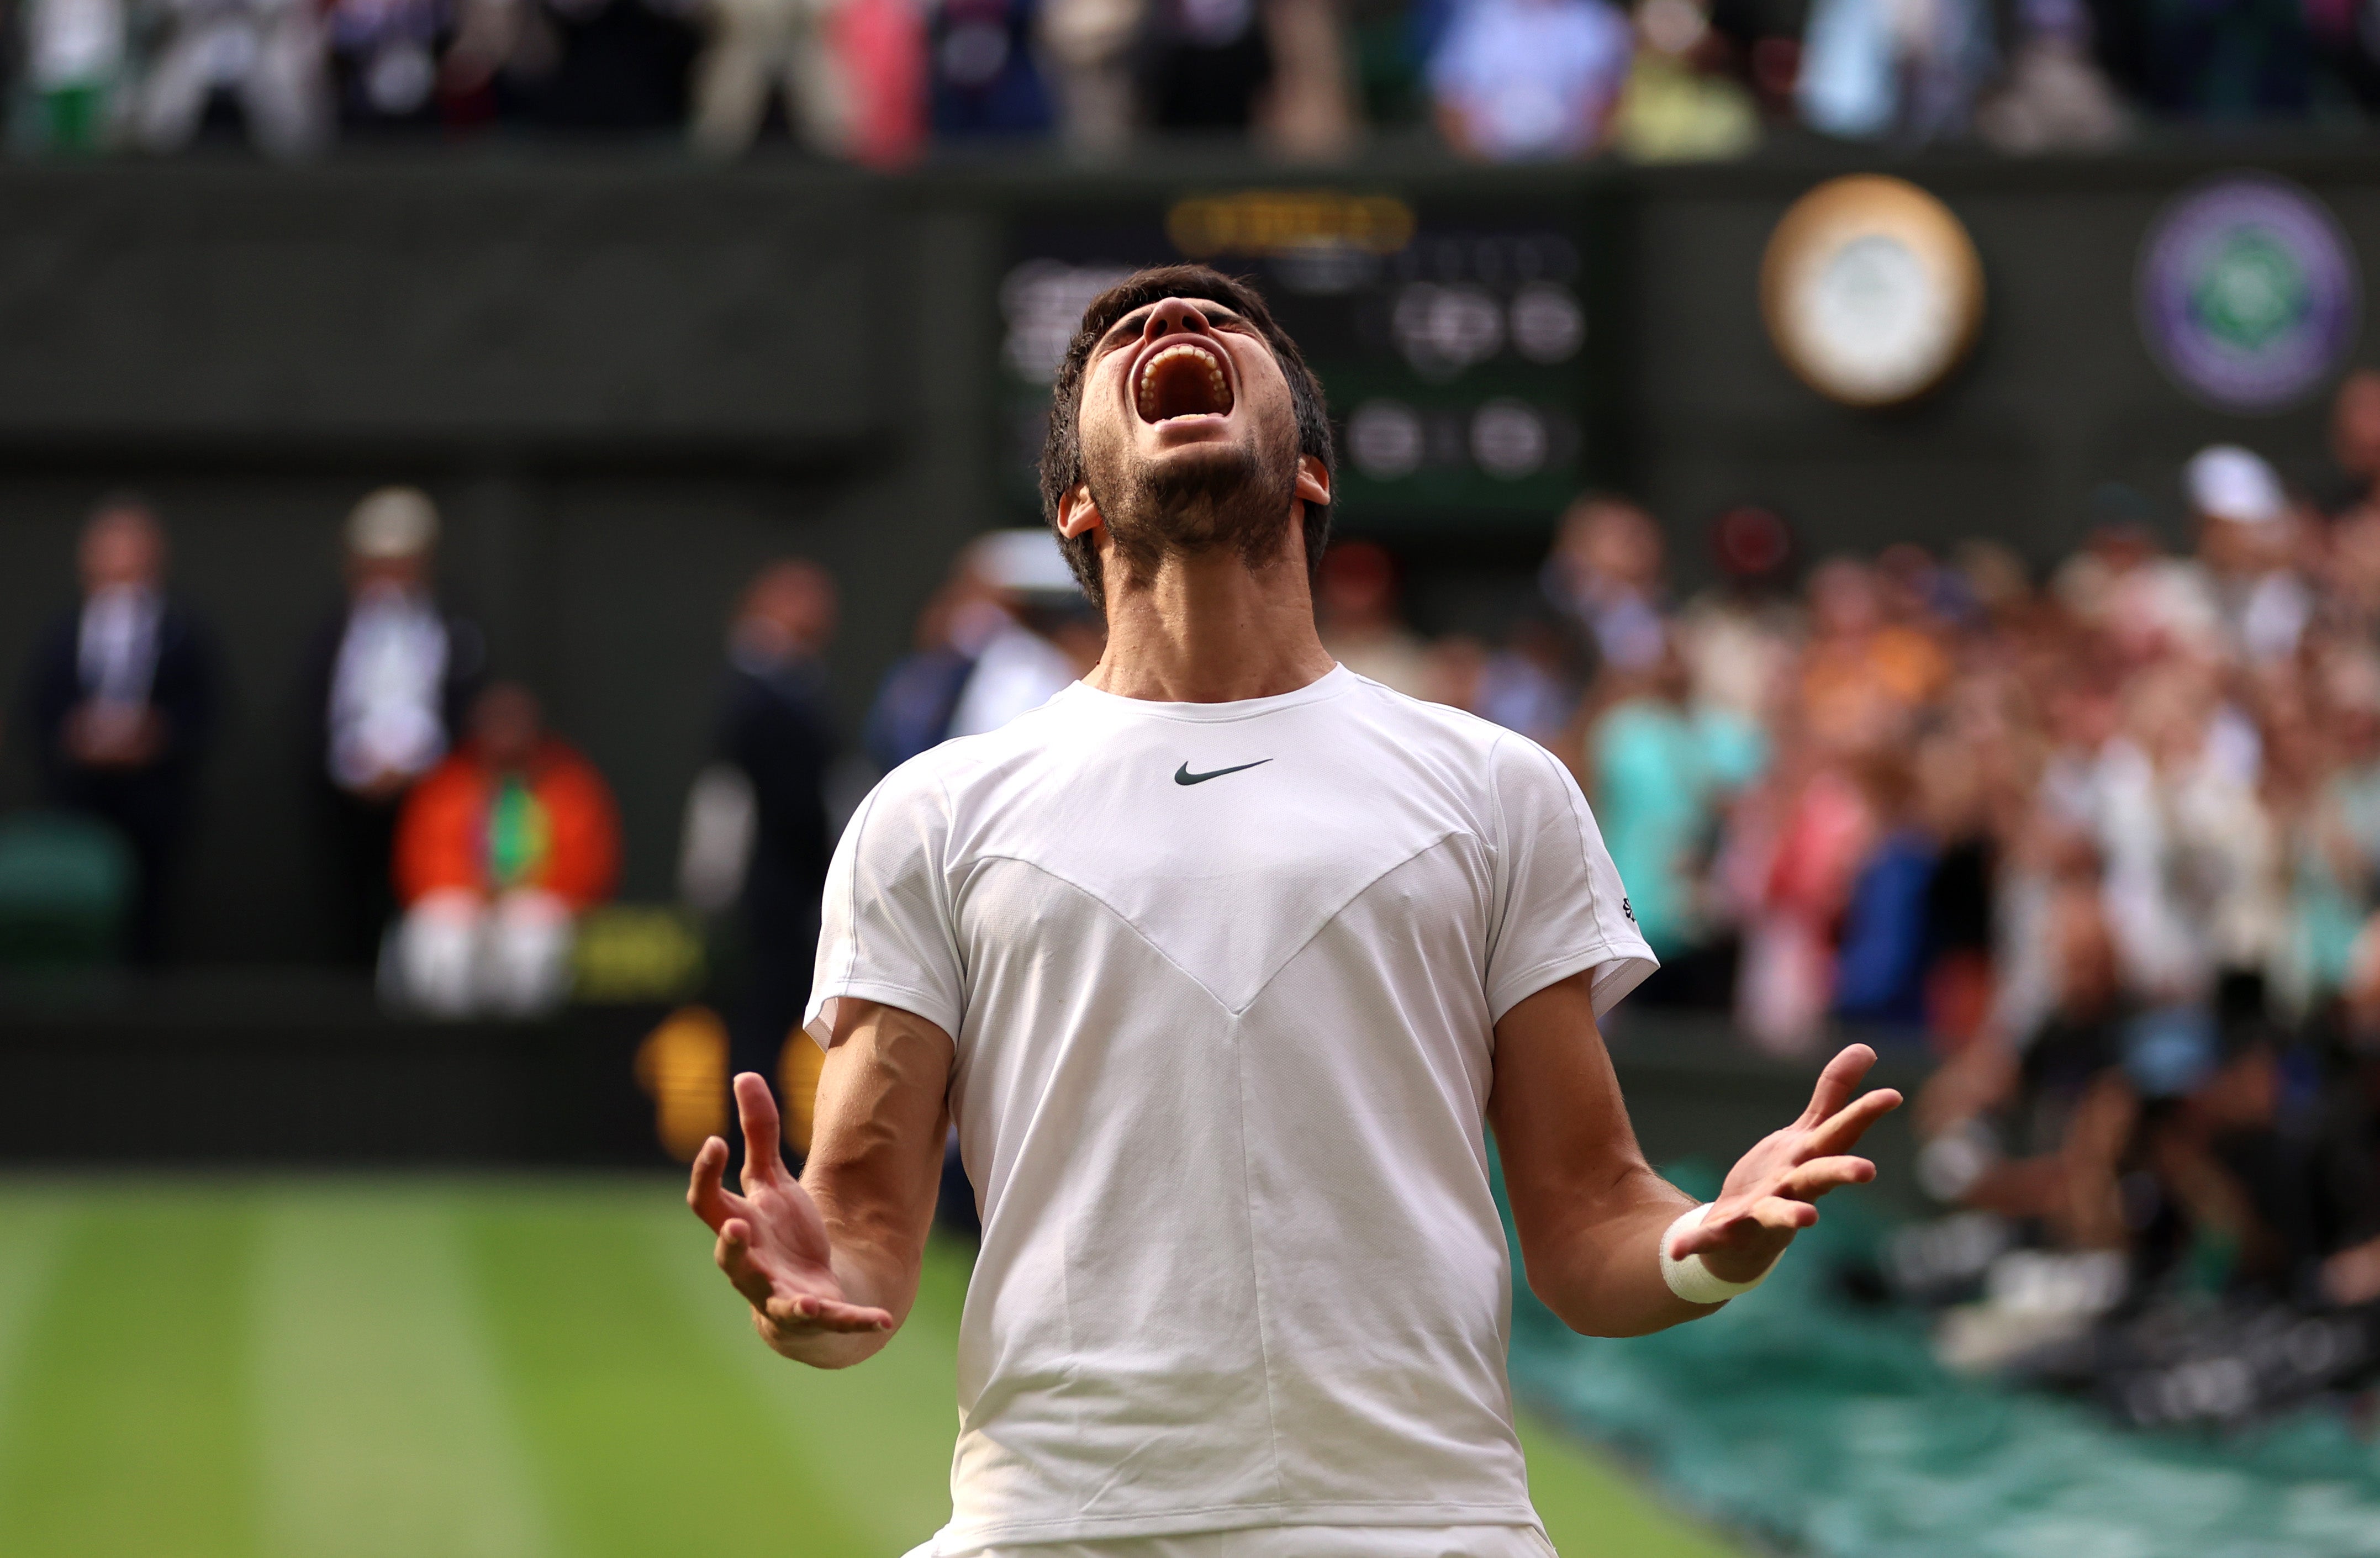 Carlos Alcaraz Captures The Impossible And Now Wimbledon Will Never Be The Same Again The